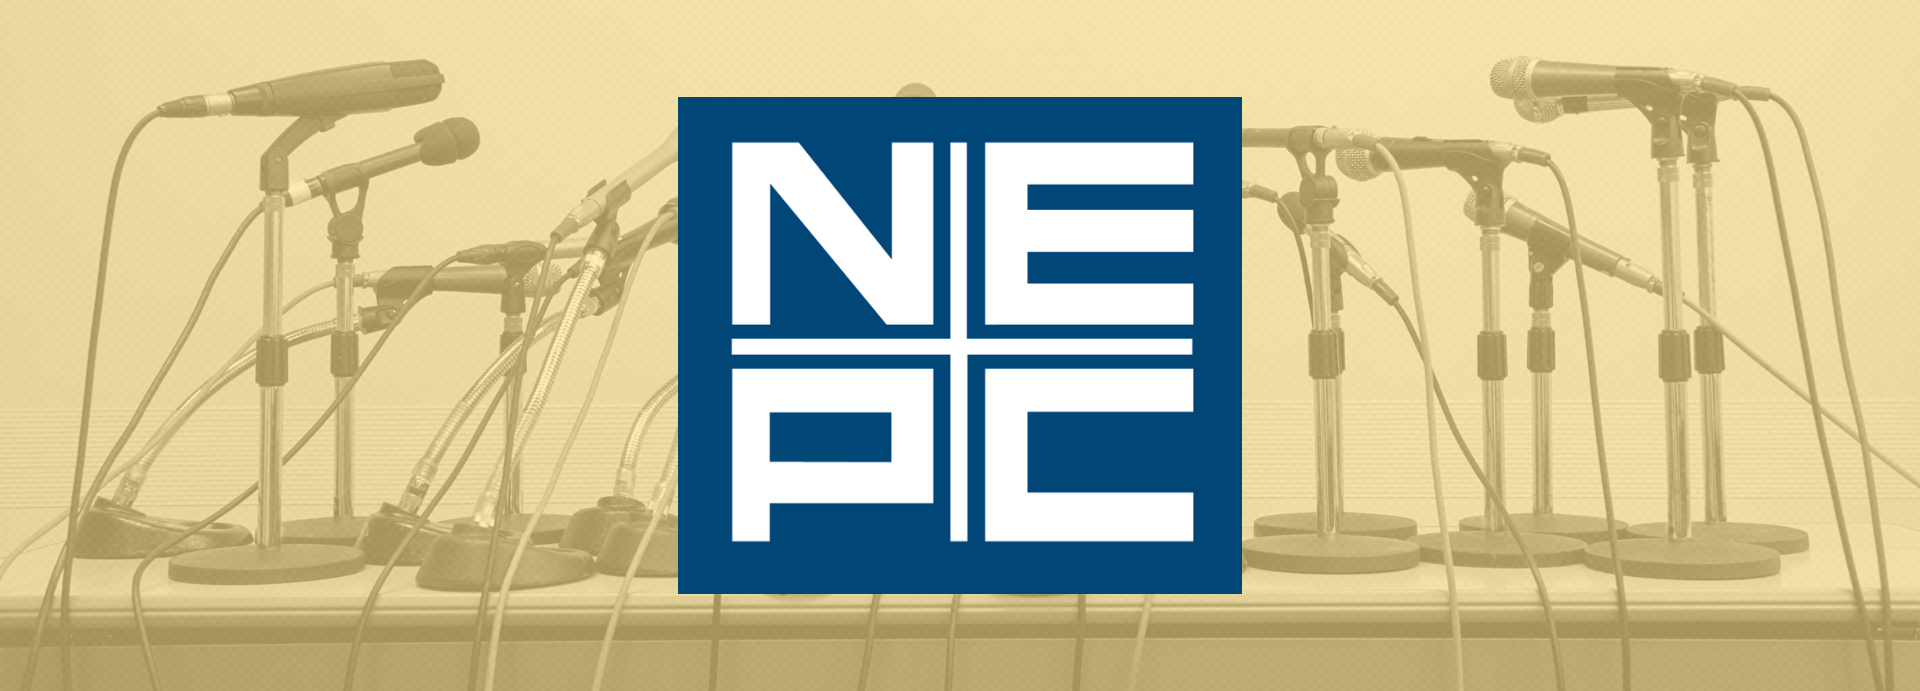 NEPC Boosts Client Assets, Strategies With Diverse Firms